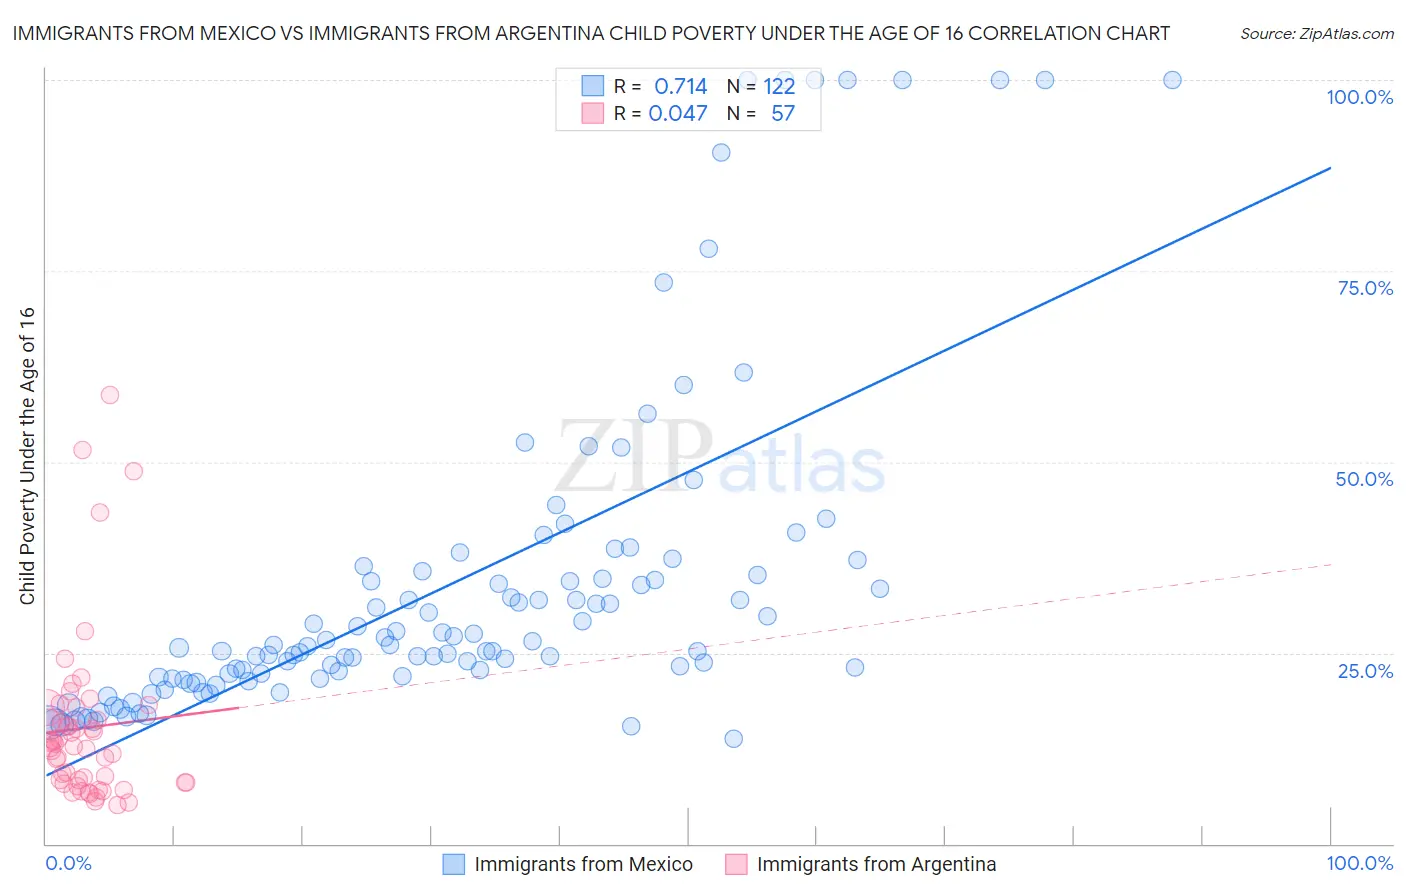 Immigrants from Mexico vs Immigrants from Argentina Child Poverty Under the Age of 16